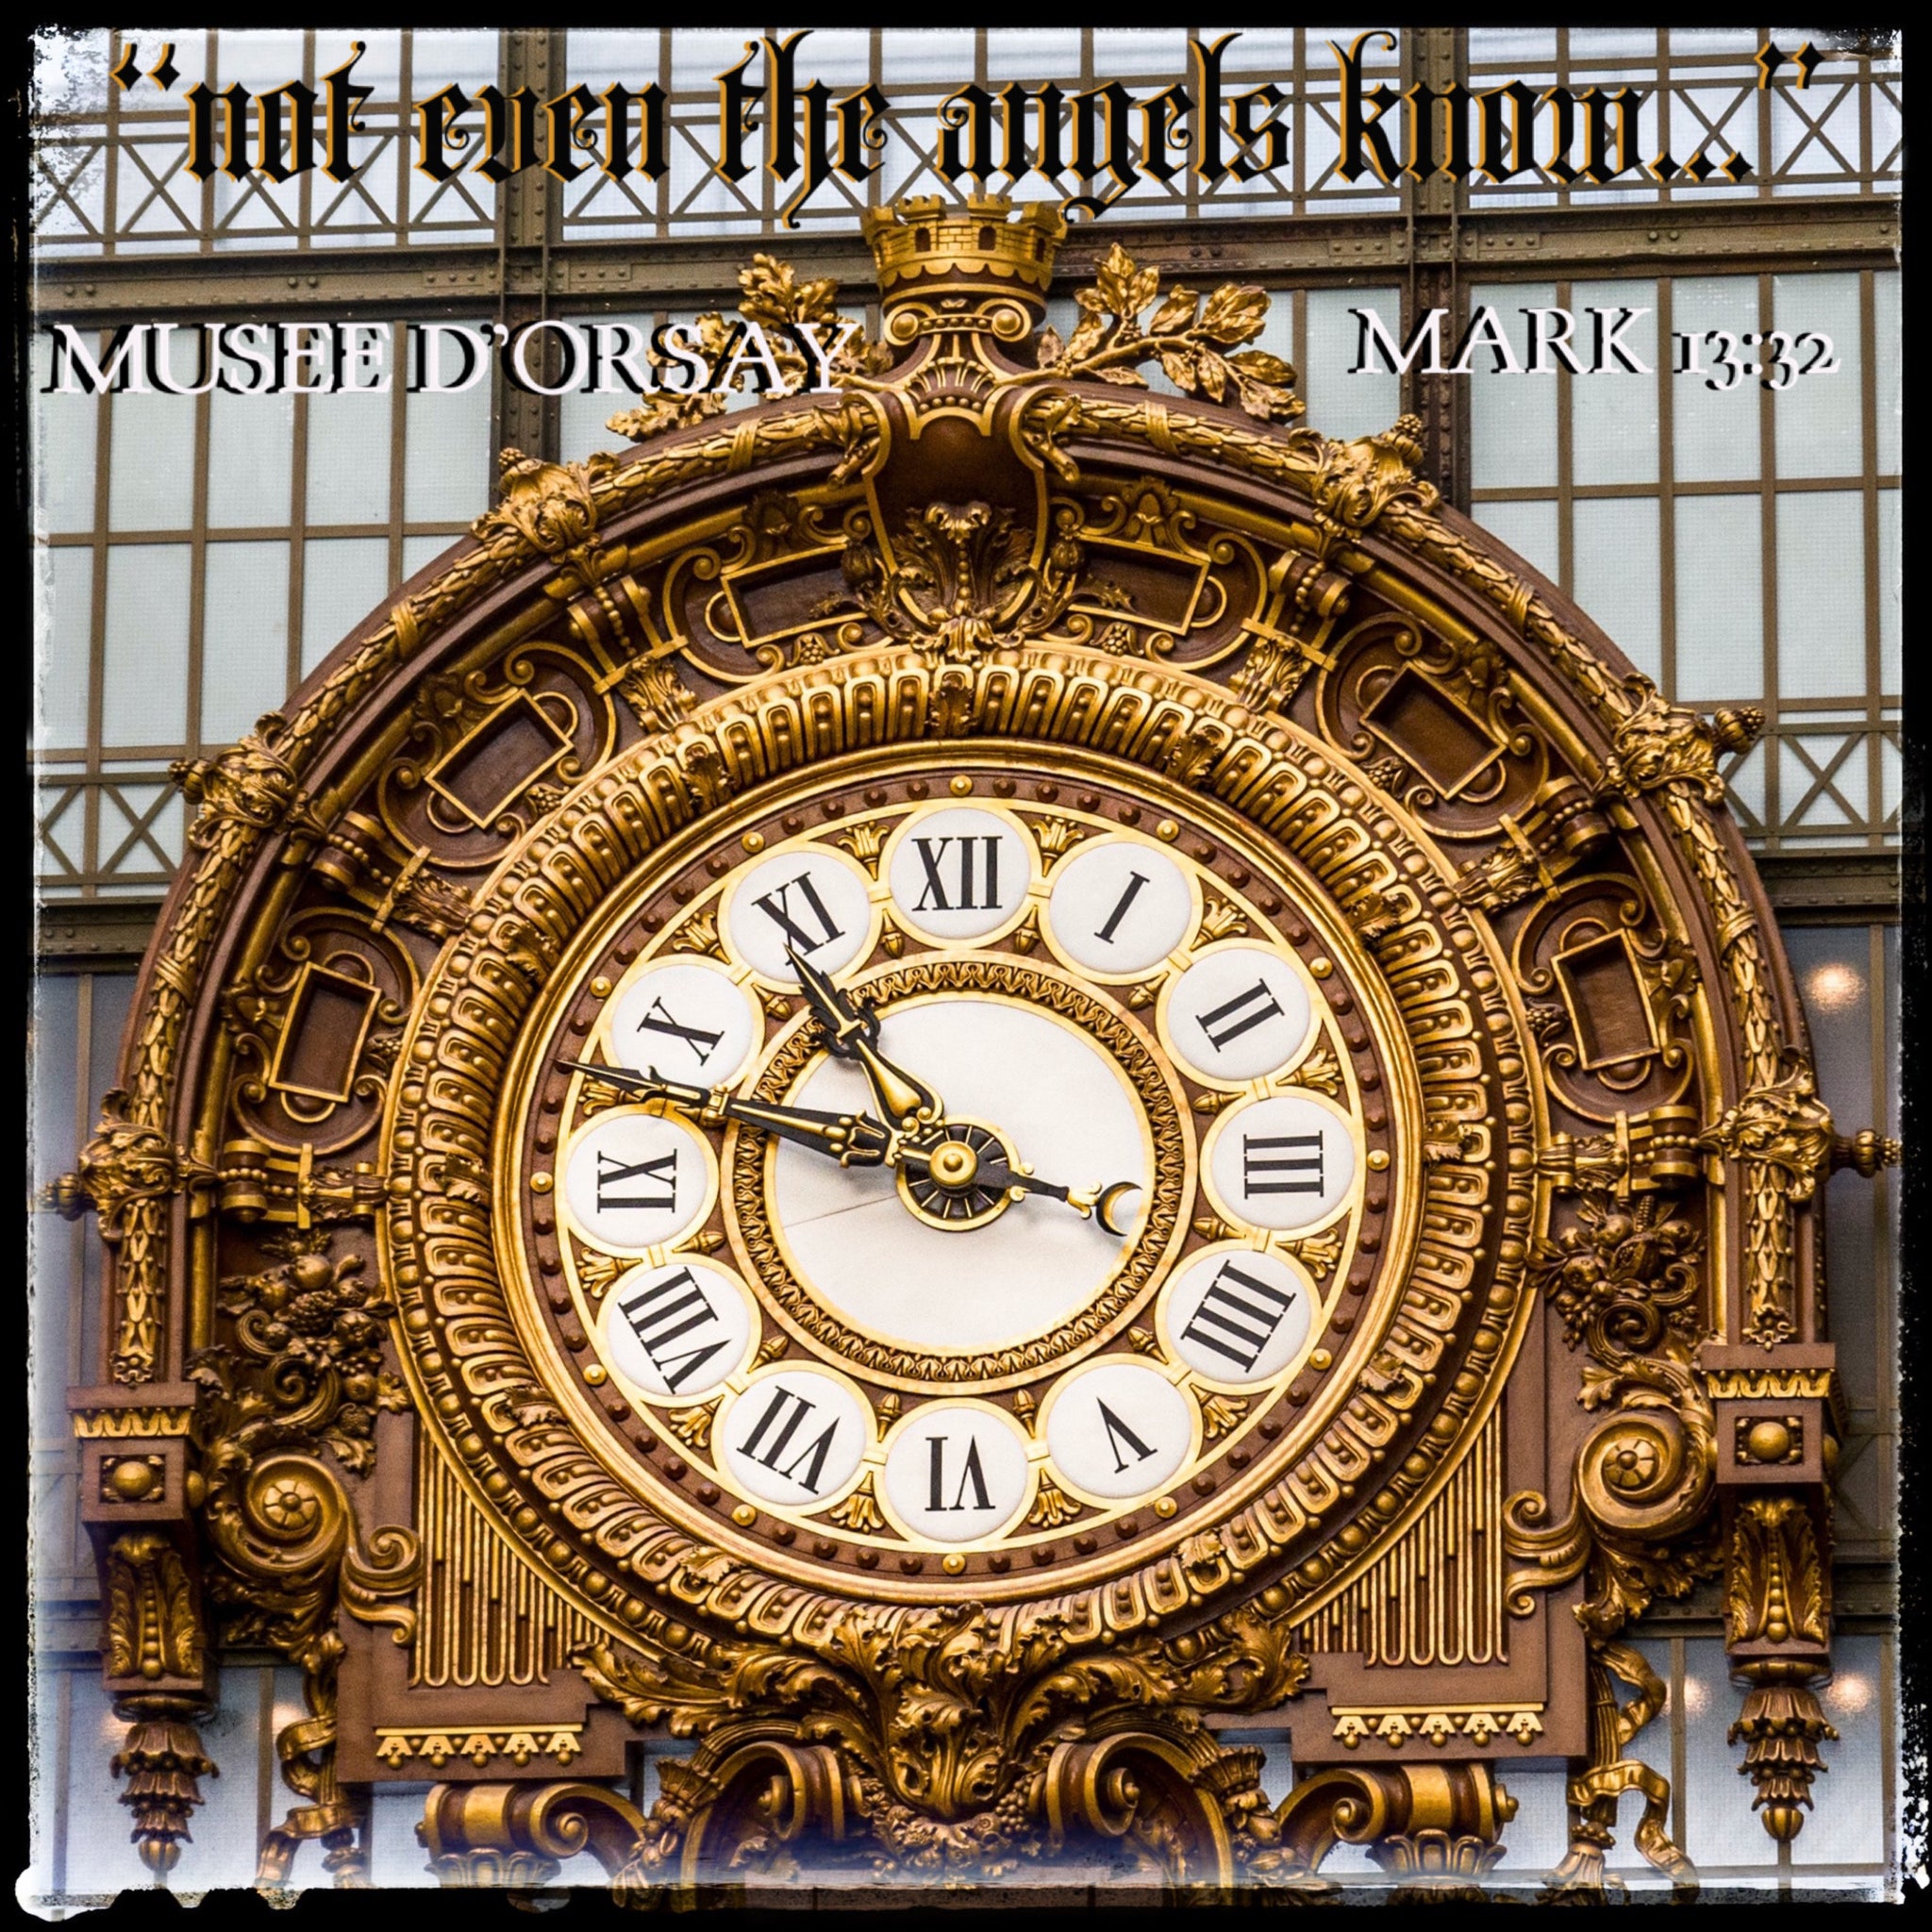 Musee D’Orsay: “not even the angels know”